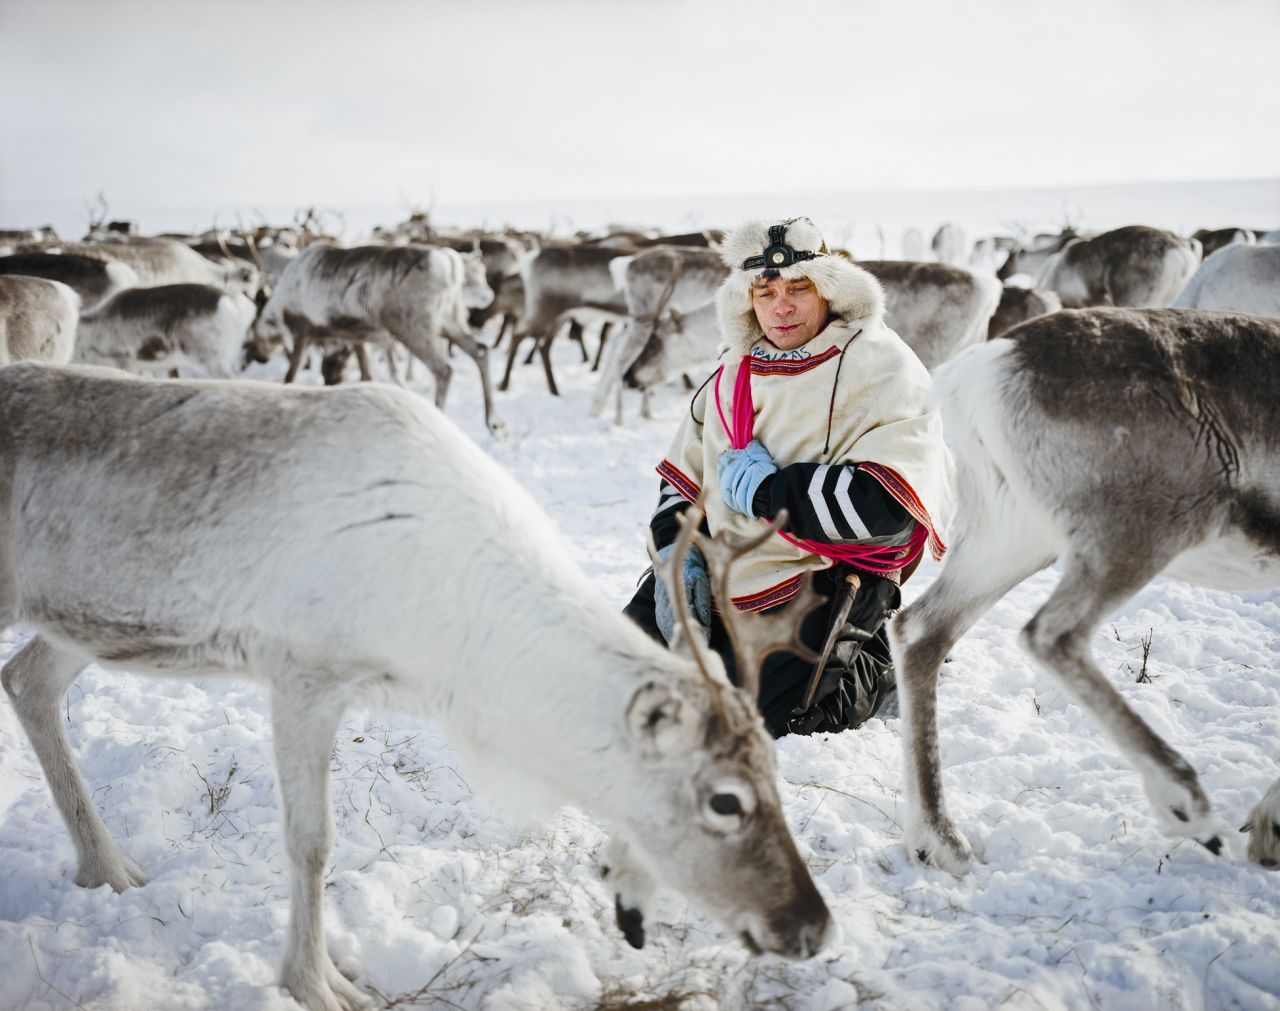 The photographs are part of a National Geographic exhibition called "Women of Vision," featuring 11 female photojournalists. Here, a herder in Norway practices a time-honored custom called yoiking -- chanting softly while tending his reindeer.